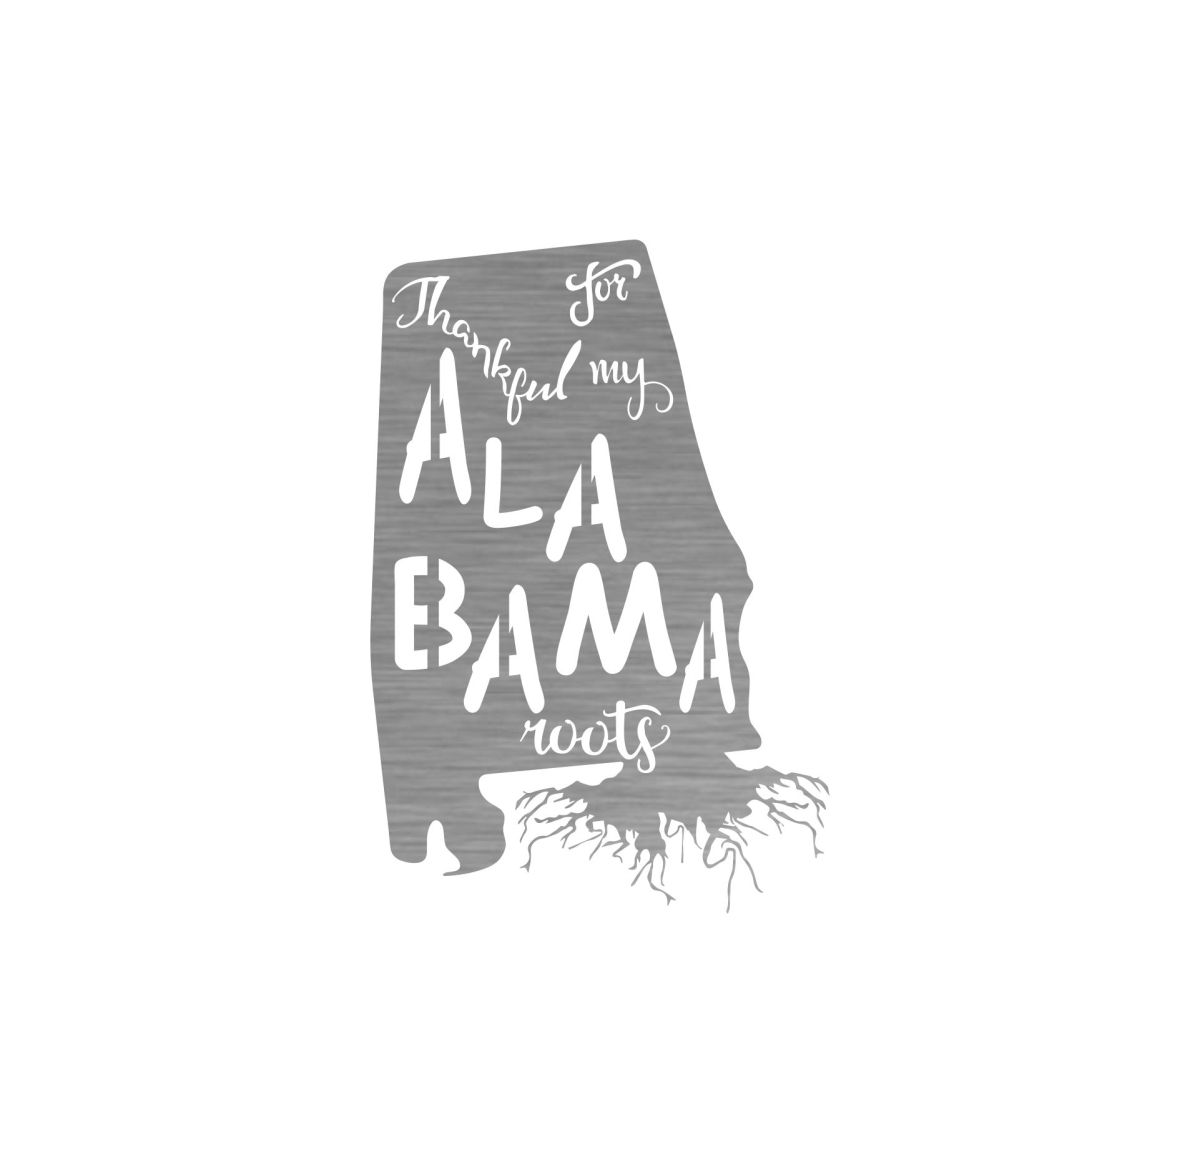 Alabamaroots-36ss 36 In. State Alabama Roots Steel Laser Cut Wall Art In Shiny Natural Steel